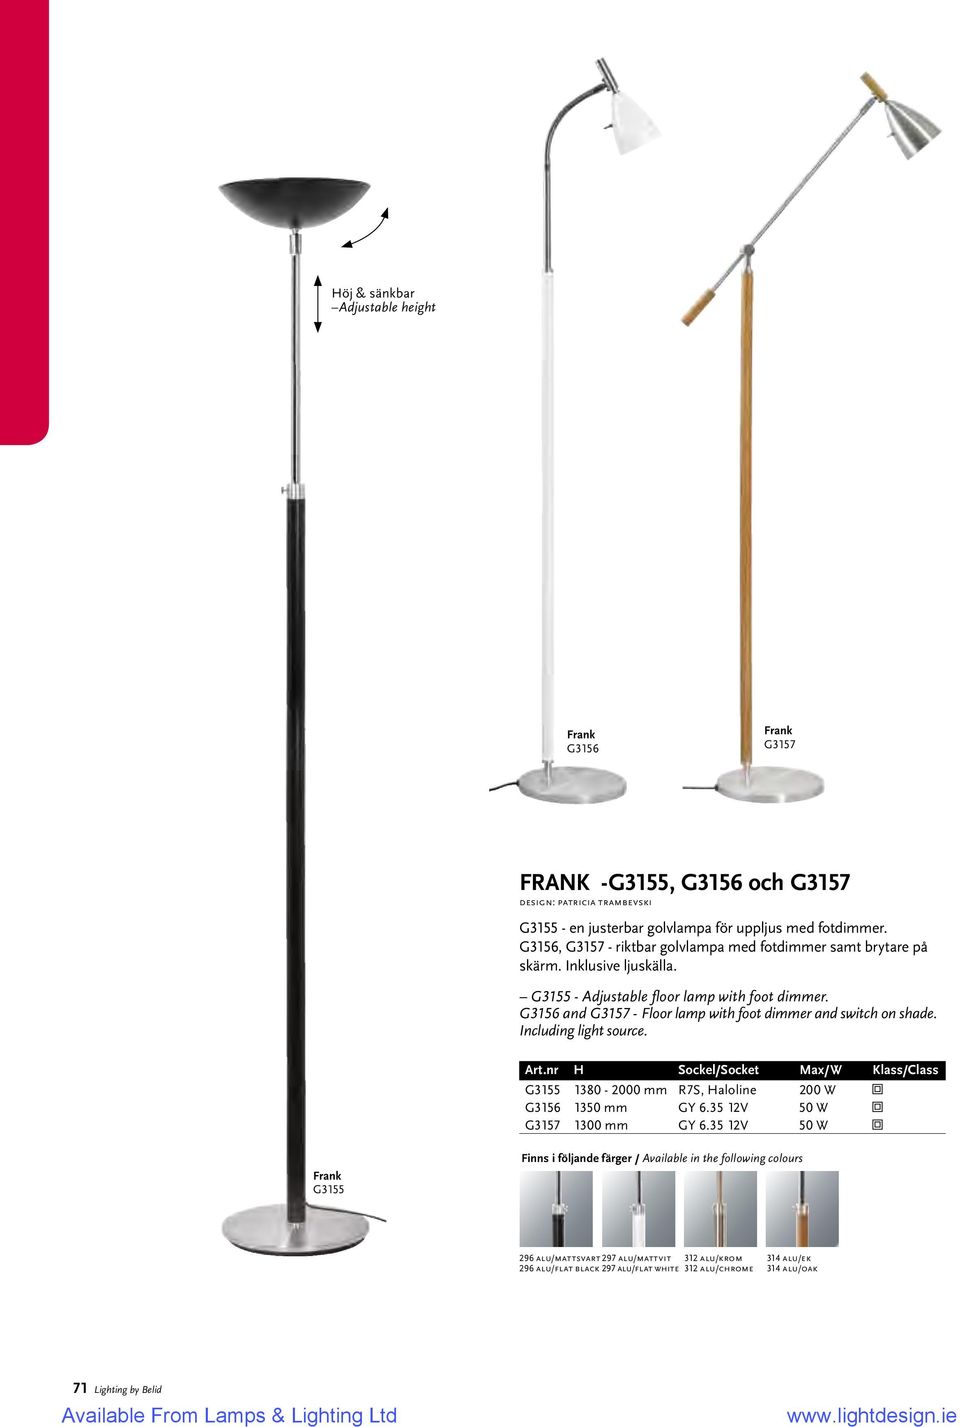 G3156 and G3157 - Floor lamp with foot dimmer and switch on shade. Including light source. G3155 1380-2000 mm R7S, Haloline 200 W G3156 1350 mm GY 6.